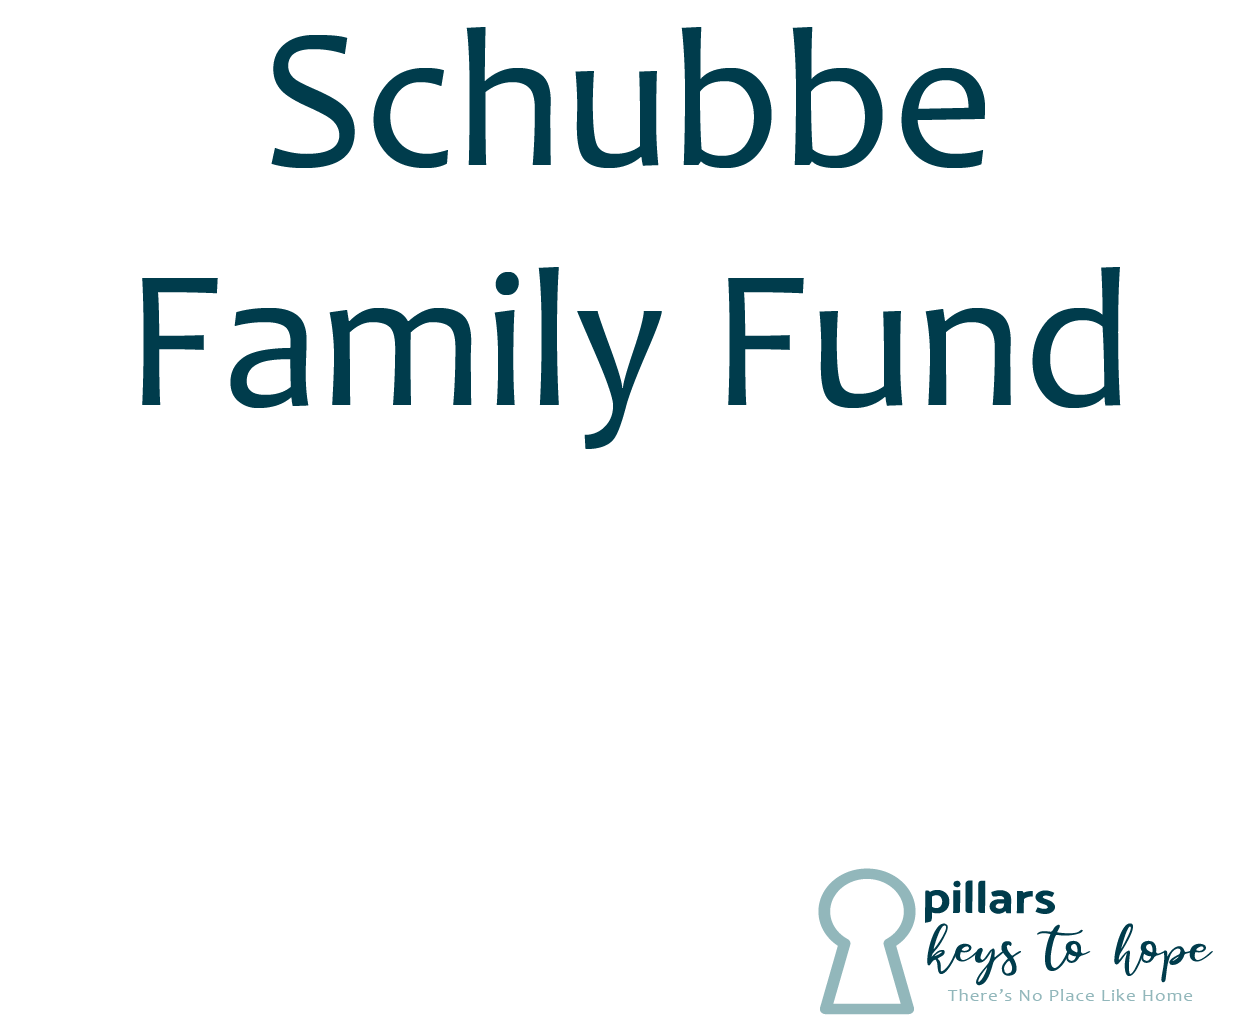 Schubbe Family Fund